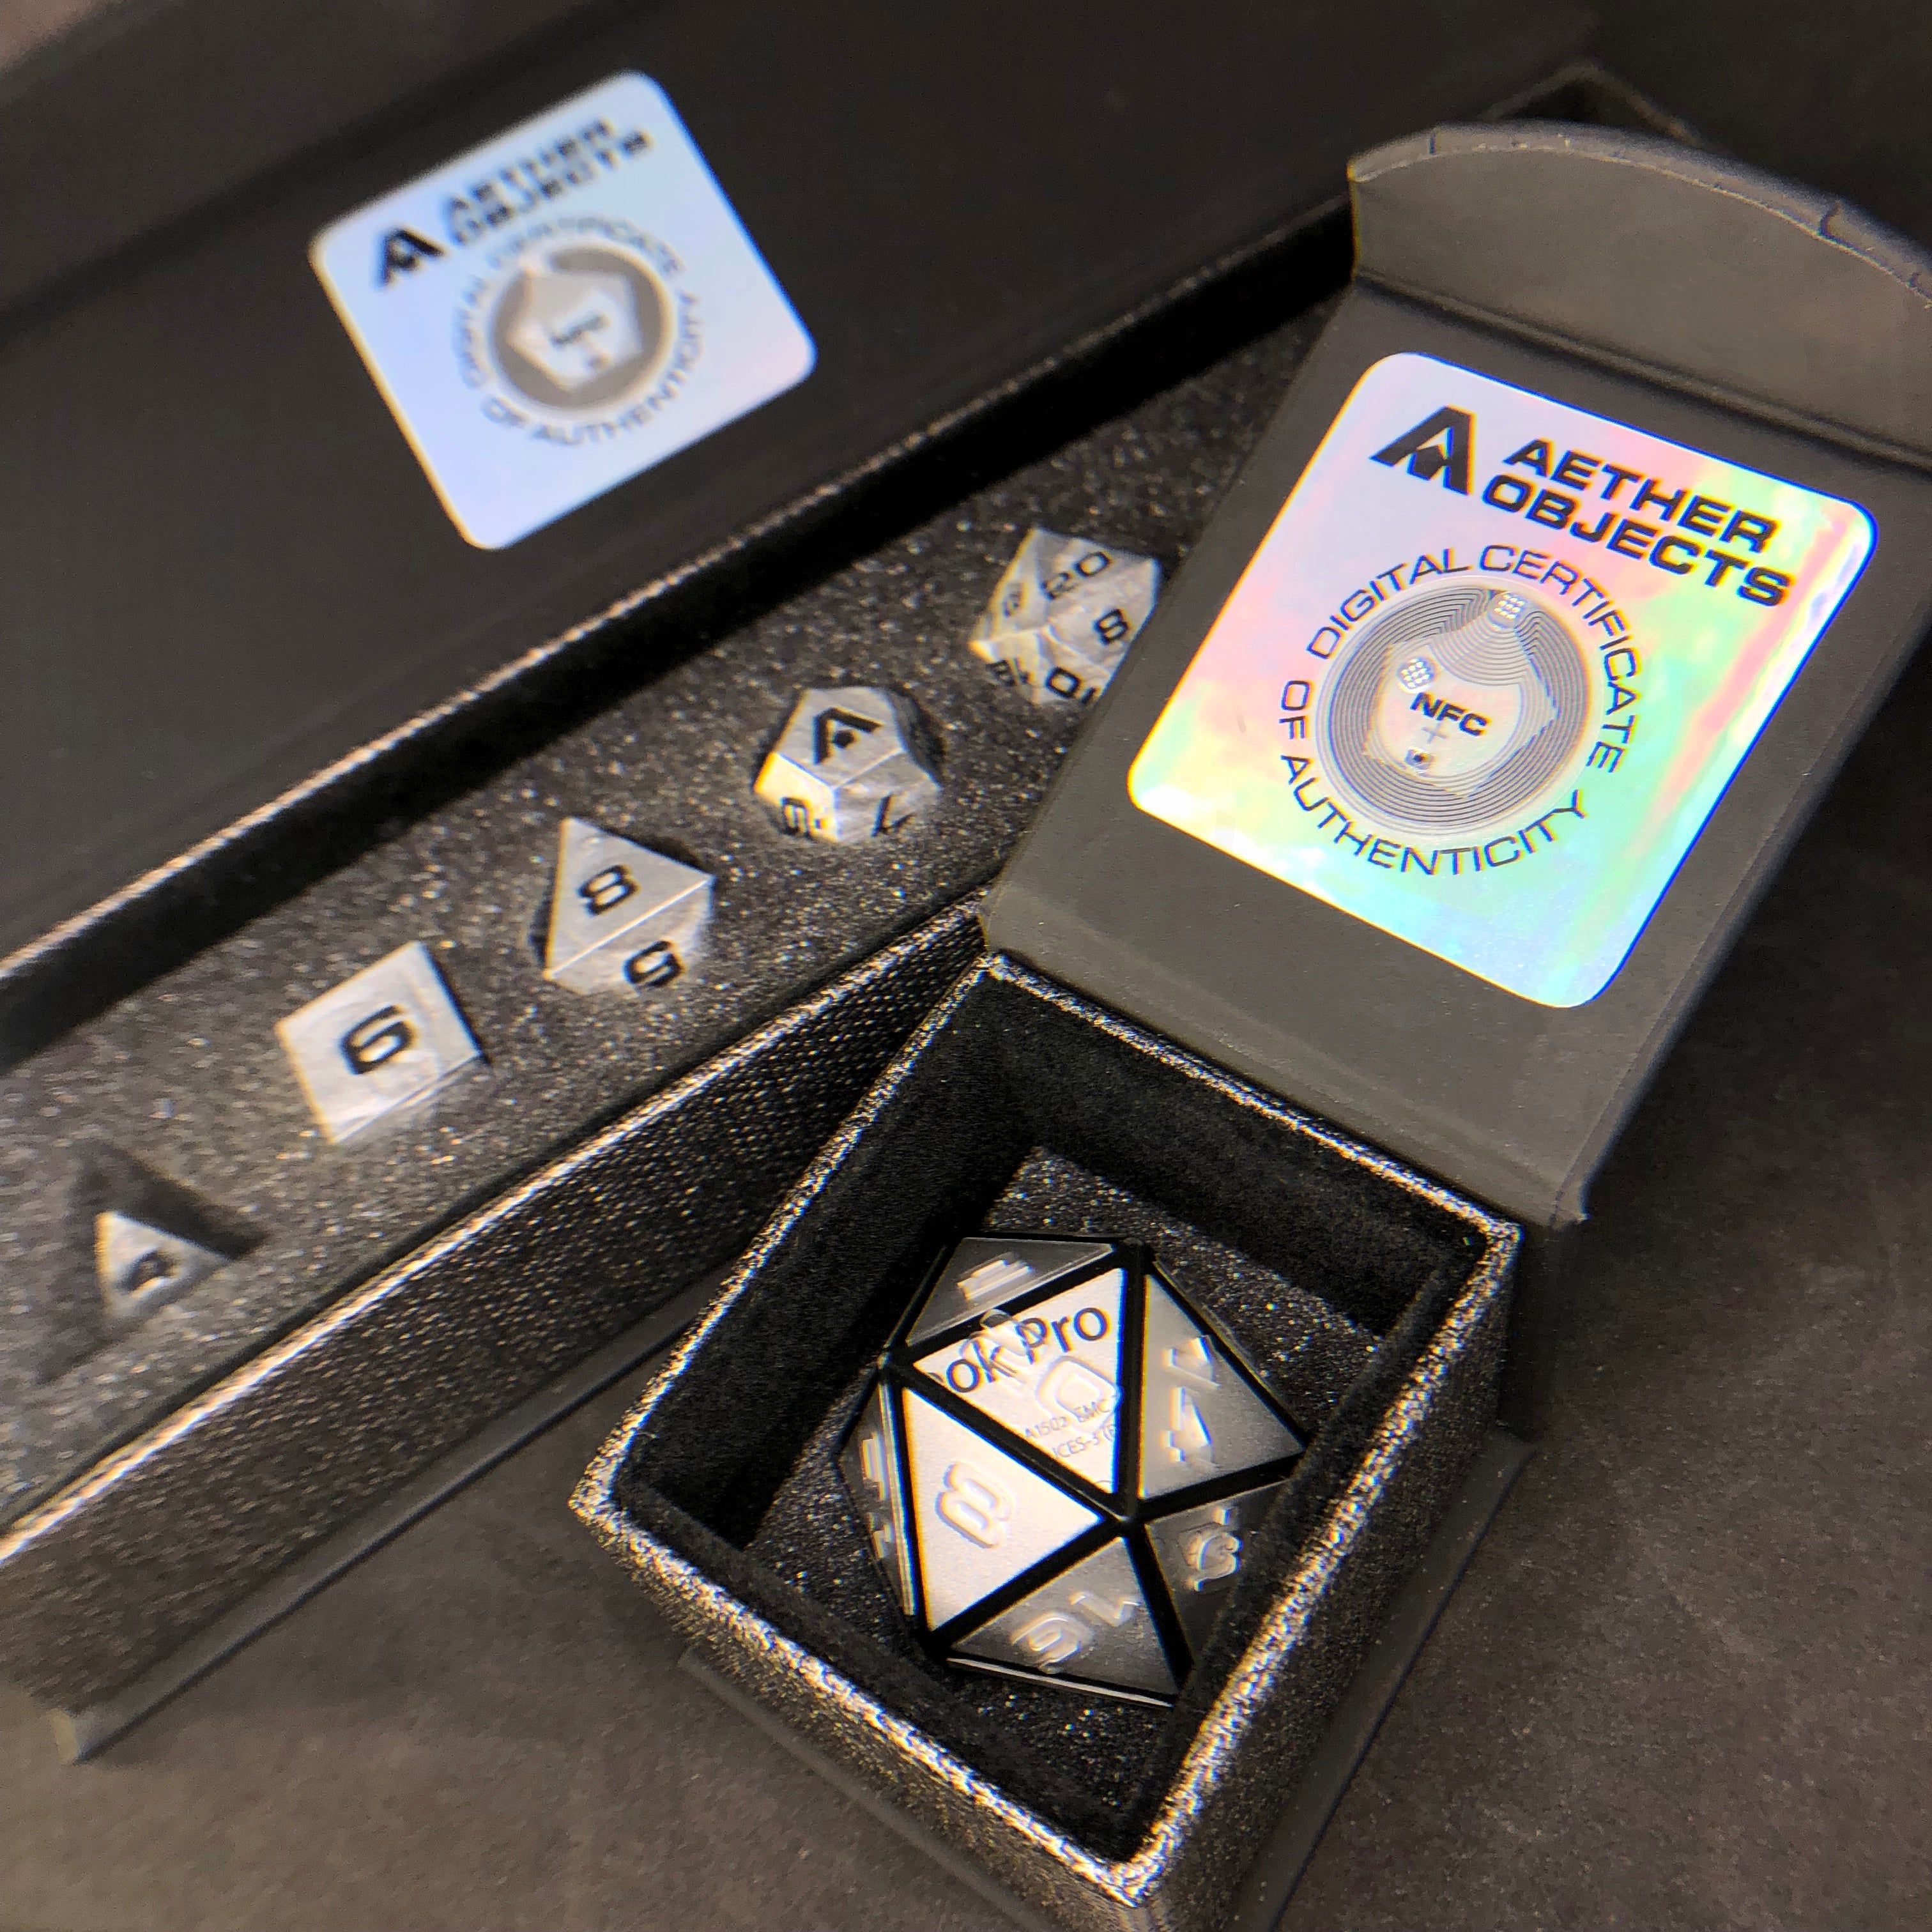 Aether Objects dice boxes with digital certificates of authenticity